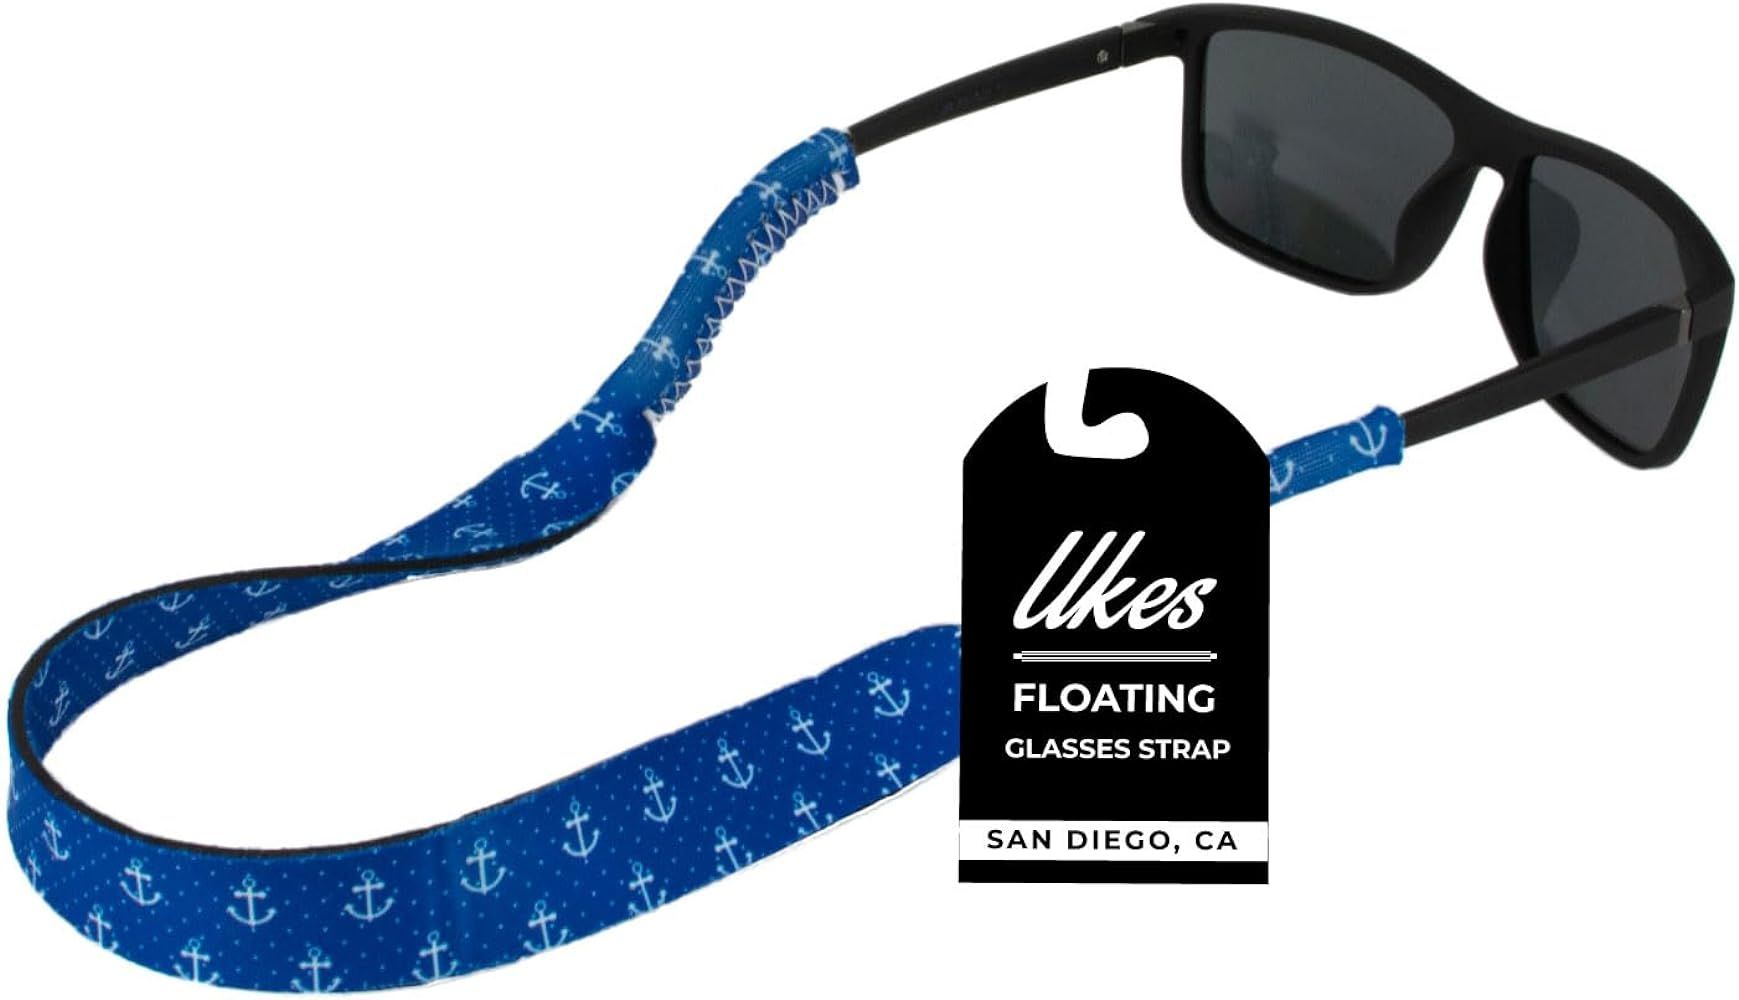 Ukes Glasses Strap - Floating Sunglasses Strap with Durable Neoprene Material - Secure Your Glass... | Amazon (US)